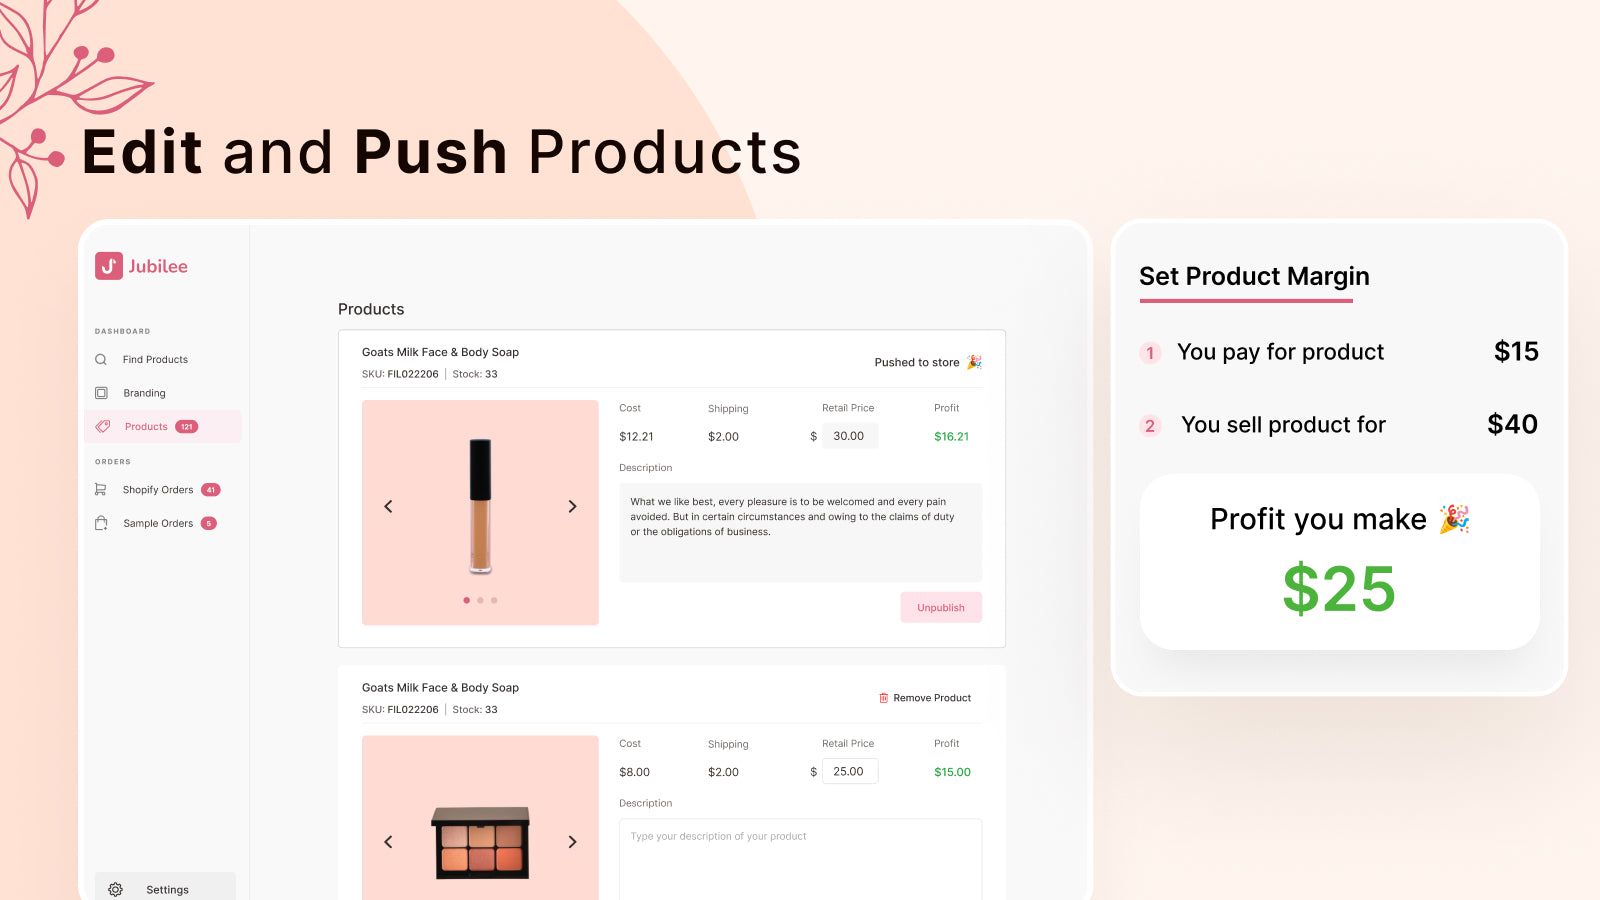 Edit products and push to store